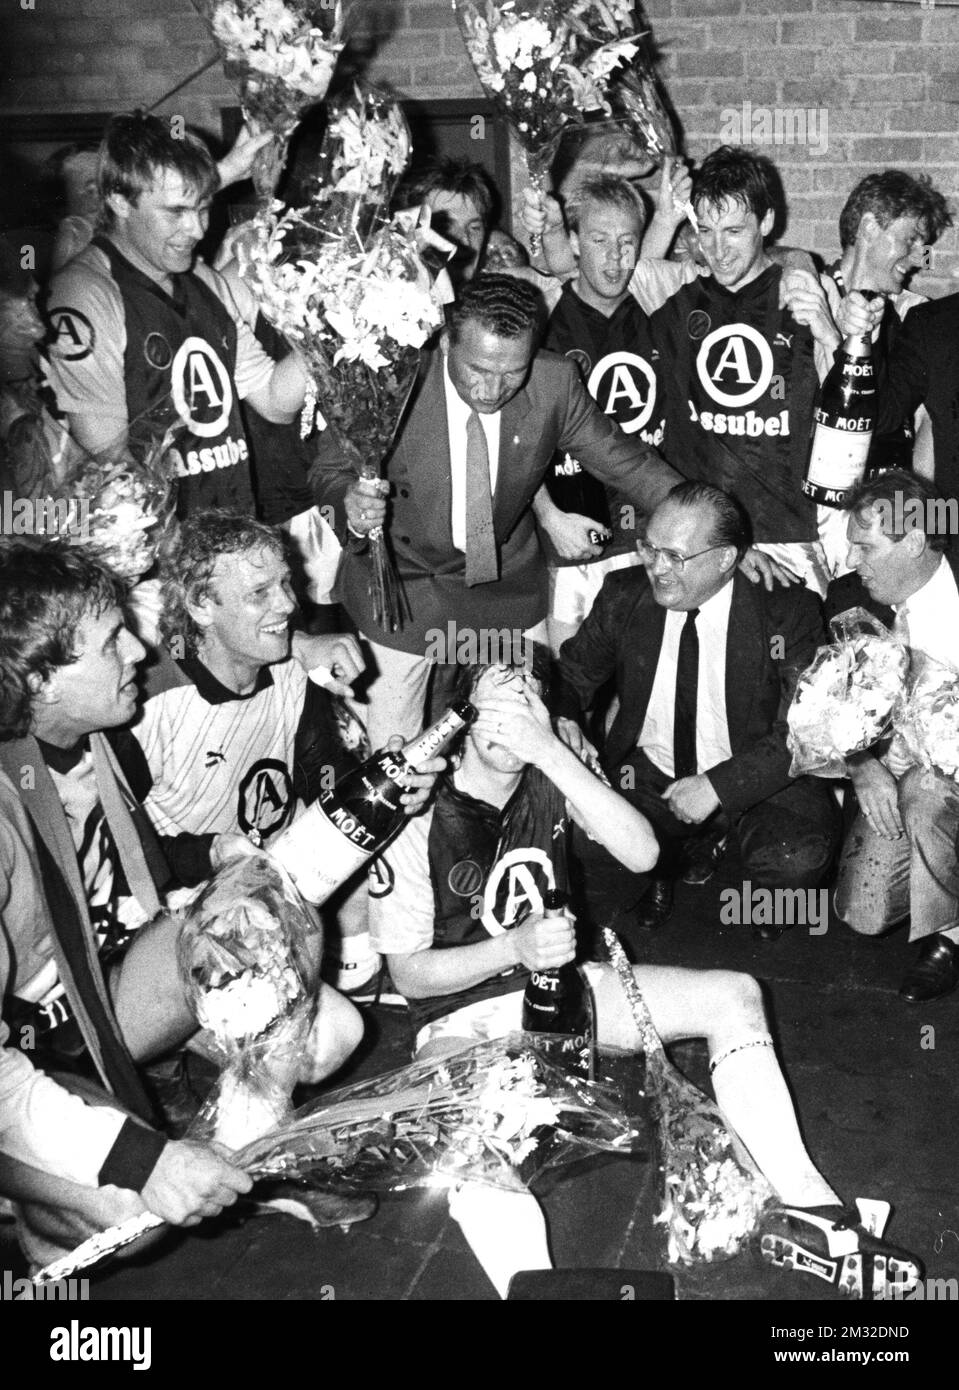 Club Brugge soccer team feasting after they won the match agains Winterslag 3-0 and becoming Campion for the 87/88 season, in the middle with glasses, is transport minister Dehaene , Sunday 15 May 1988. BELGA PHOTO ARCHIVES  Stock Photo